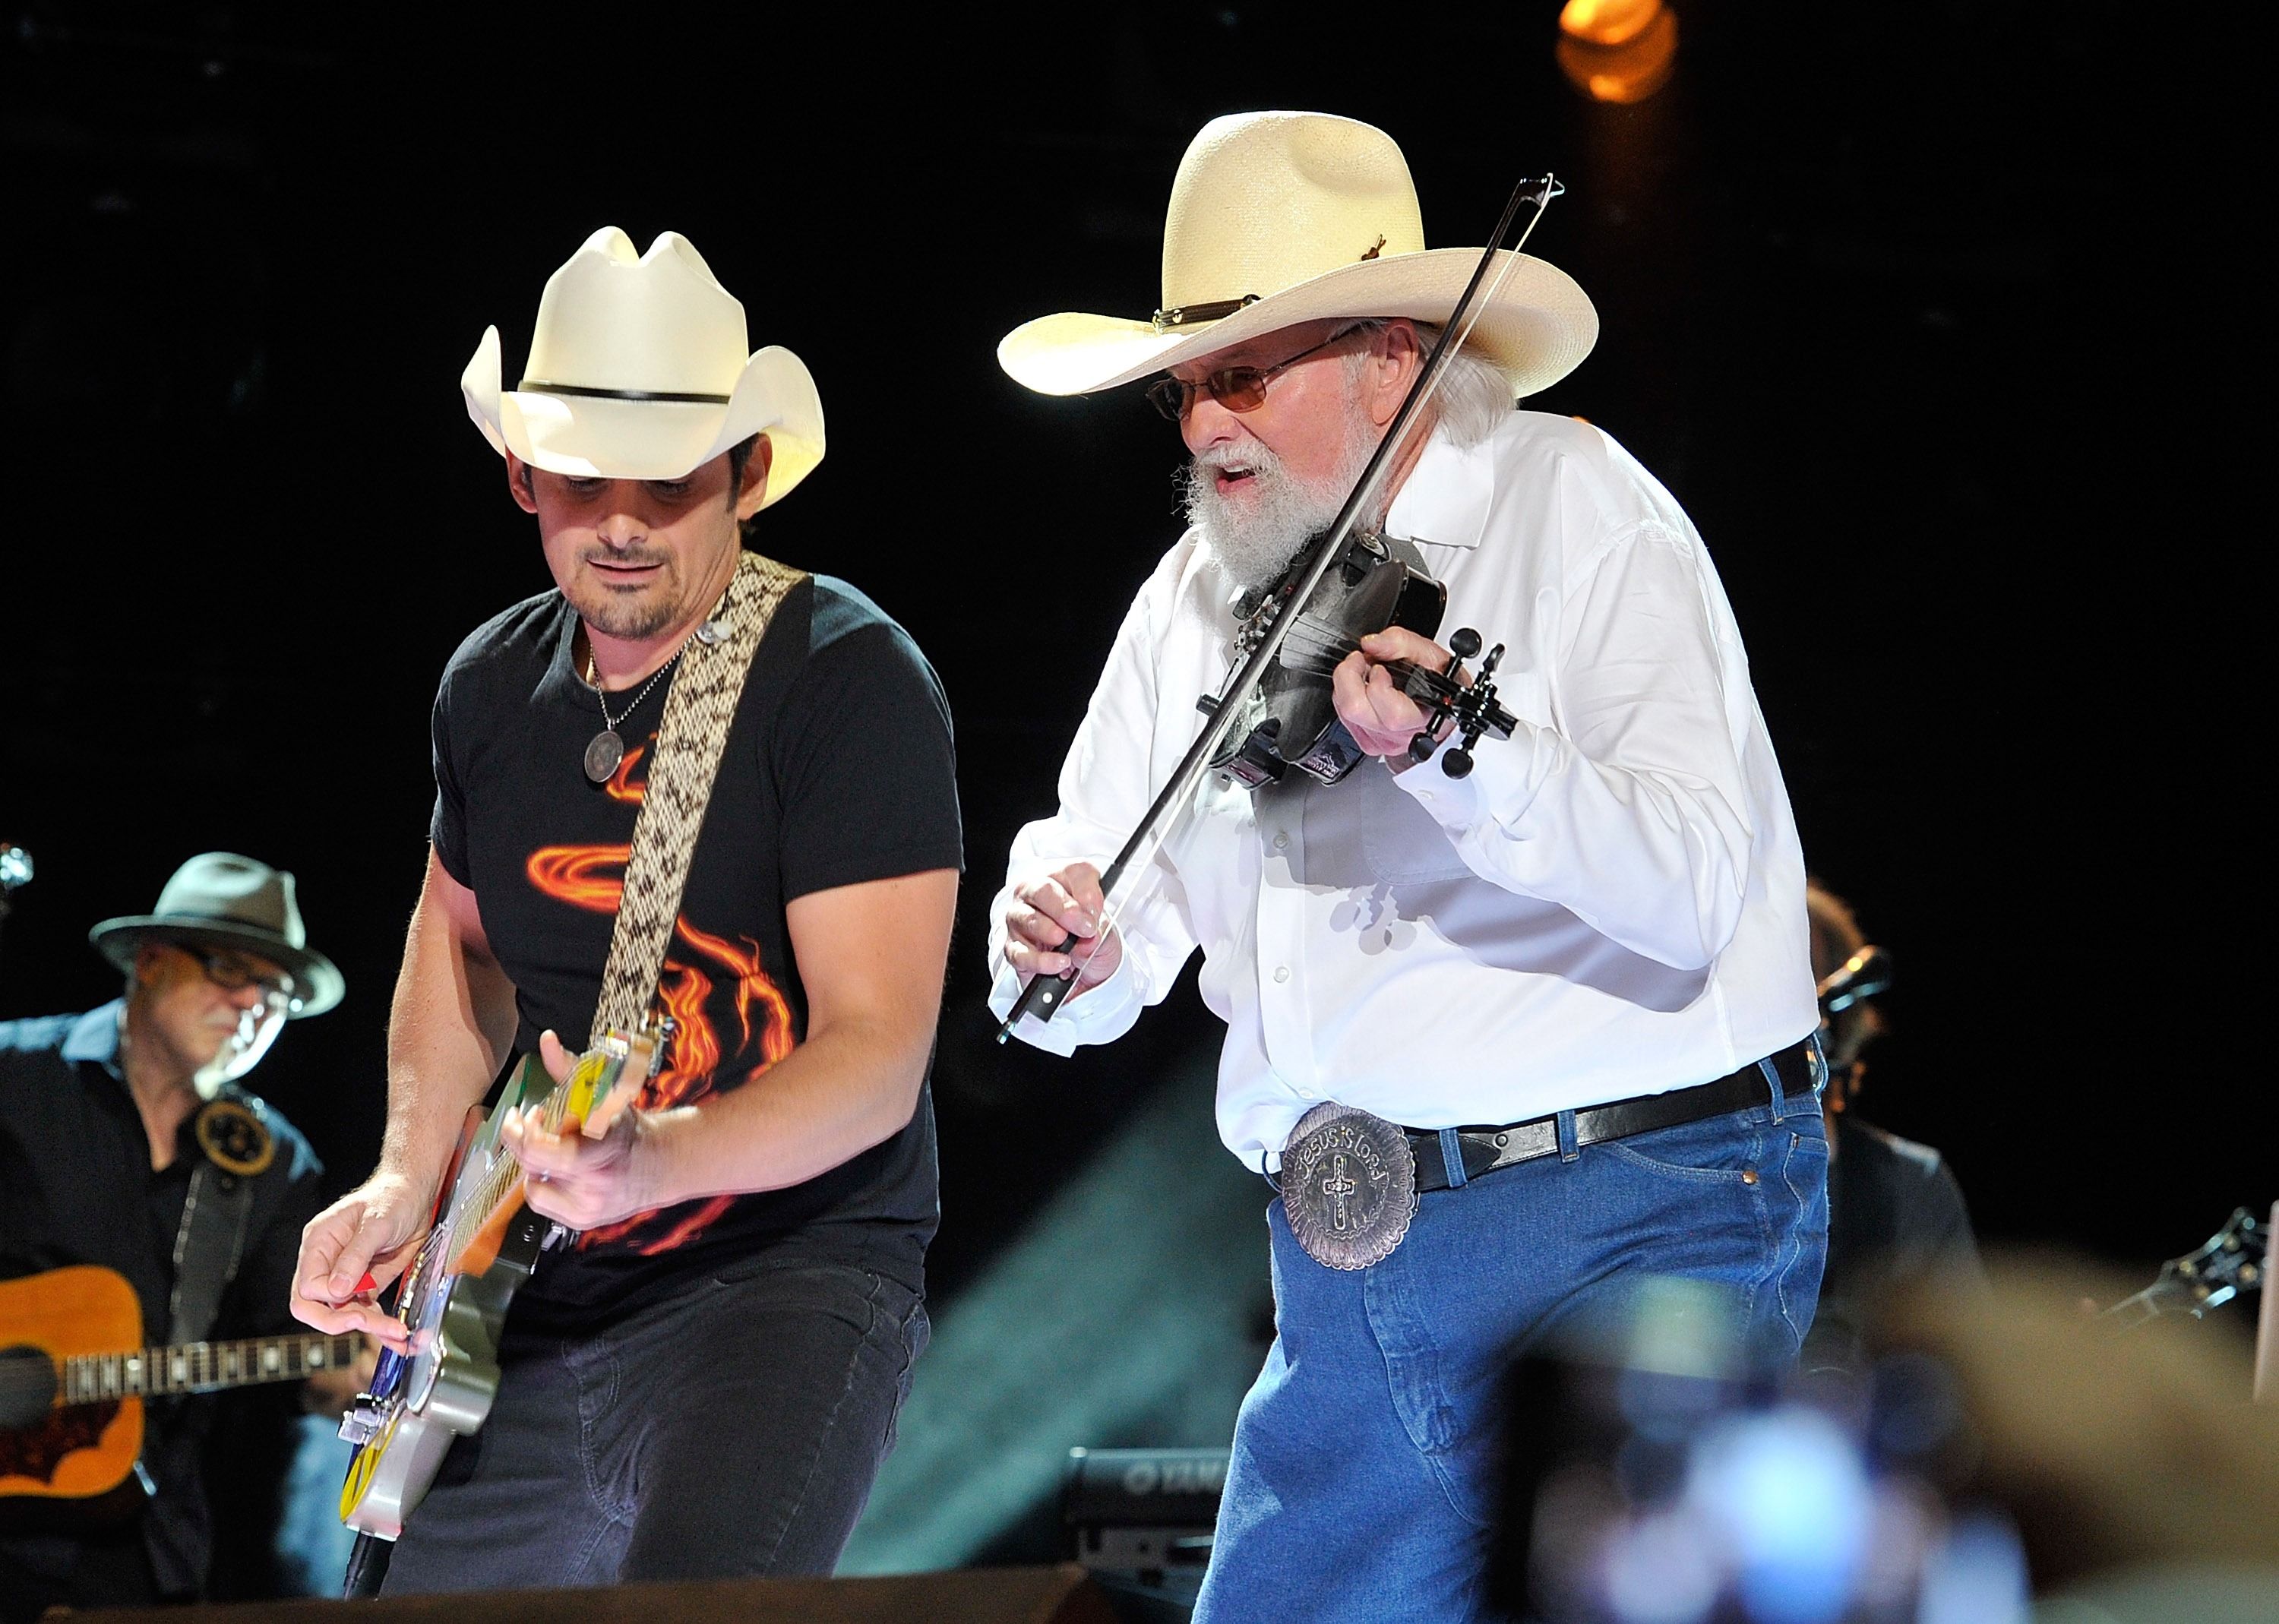 Brad Paisley and Charlie Daniels at the 2013 CMA Music Festival in 2013 in Nashville, Tennessee | Source: Getty Images